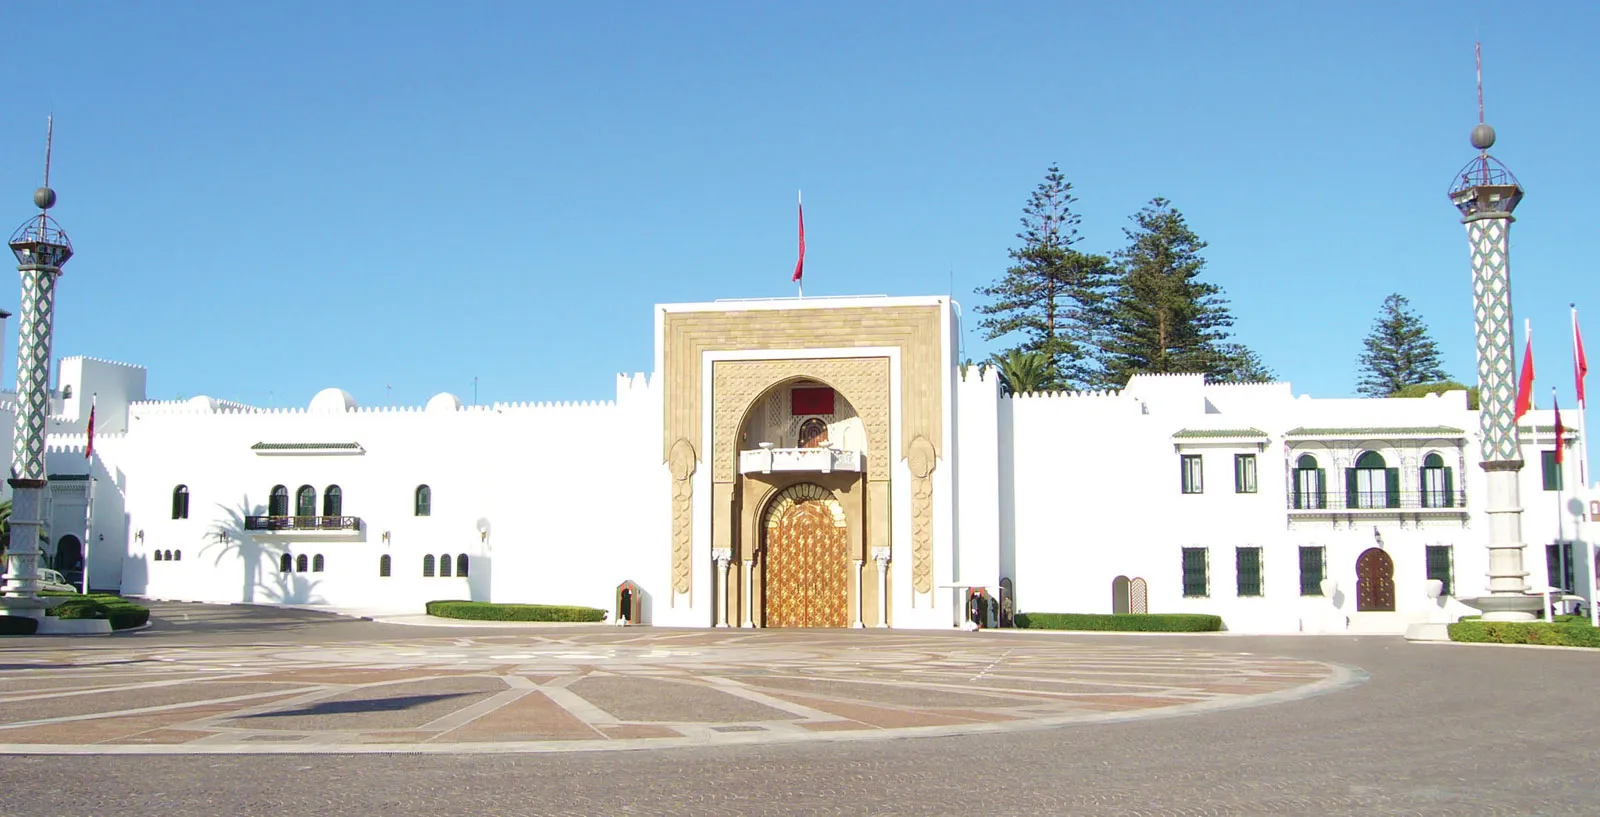 Exterior view of Tetouan's Royal Palace, showcasing its grand architecture and ornate details.